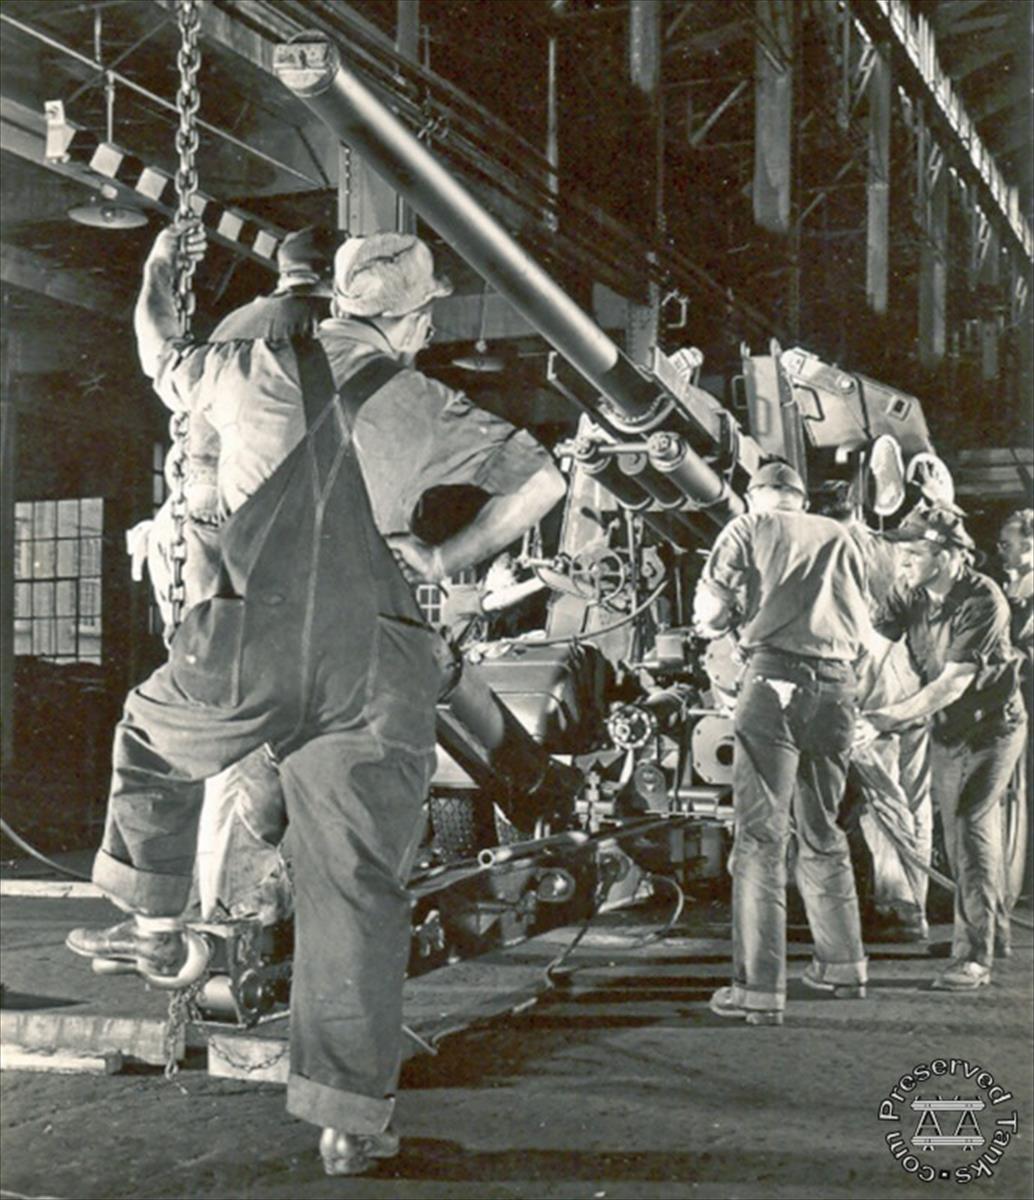 “This photograph of Allis-Chalmers employees at the La Porte Works shows a World War II scene typical of U.S. factories. Having converted to war production from their regular line of agricultural harvesting equipment, Allis-Chalmers was busy with government contracts for machinery to be used in the war effort. In this view, the workers are shown finishing a 90 m.m. gun.”, photo and caption from LaPorteCountyHistory.org